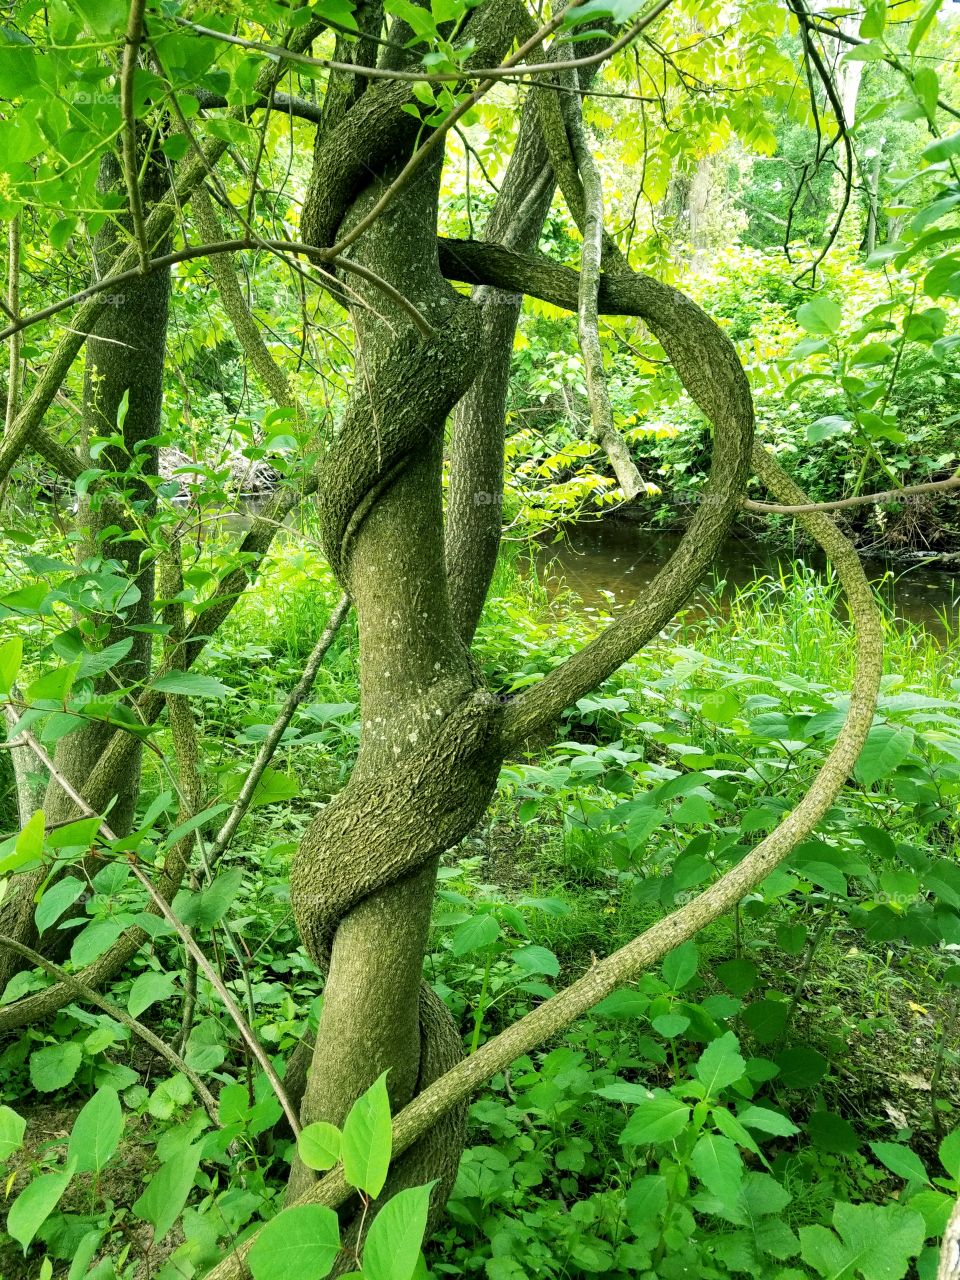 Intertwined trees